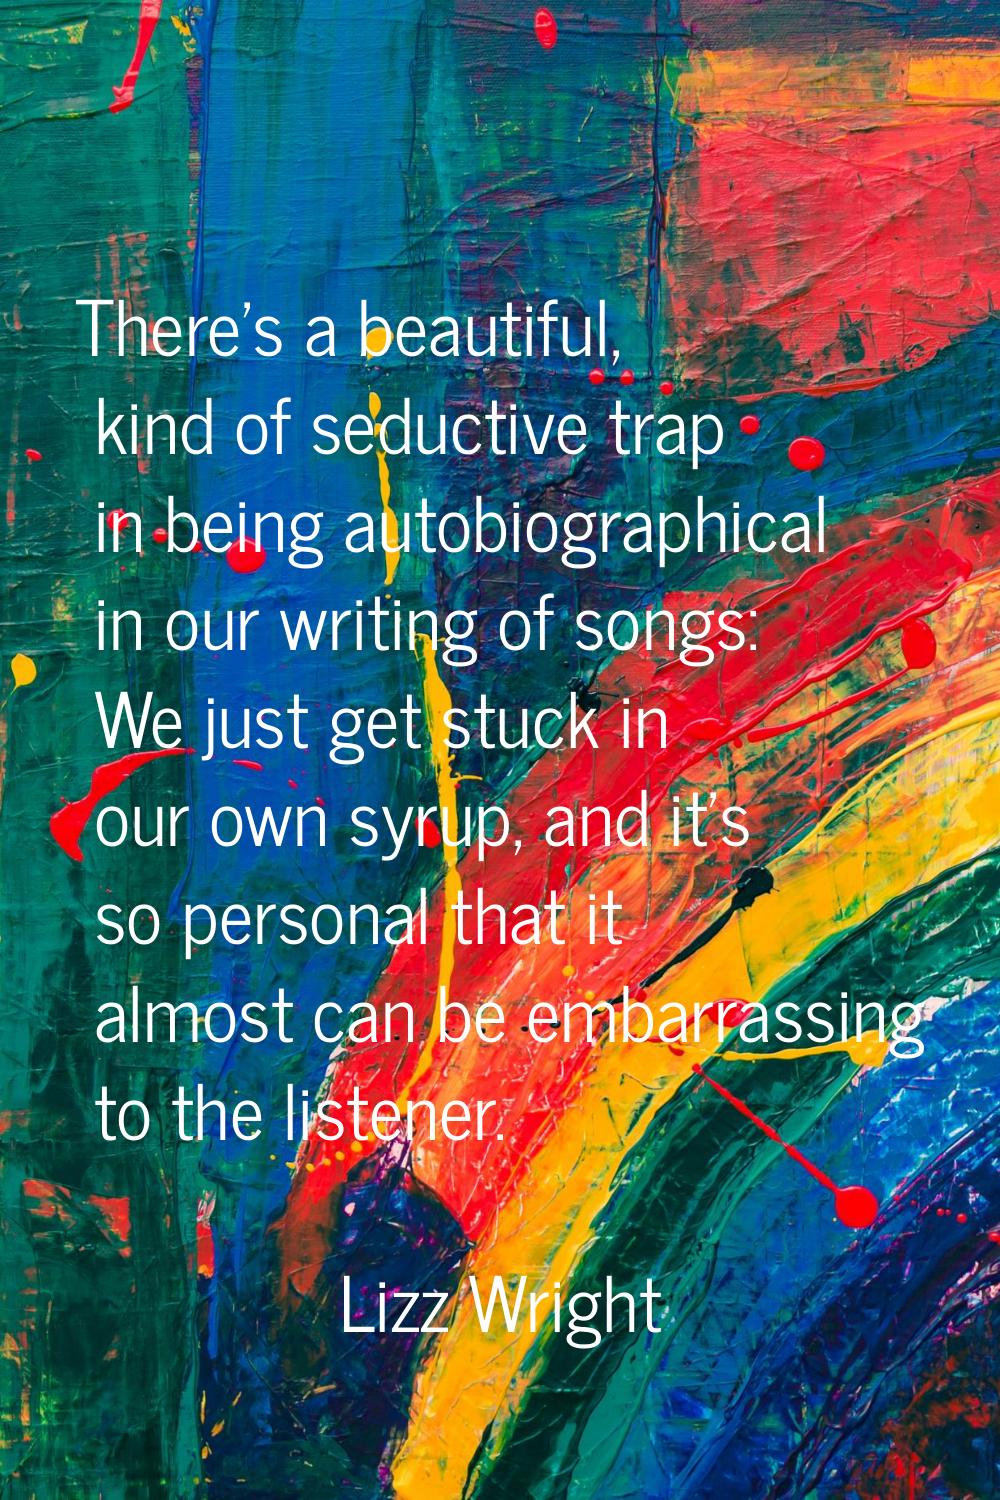 There's a beautiful, kind of seductive trap in being autobiographical in our writing of songs: We j